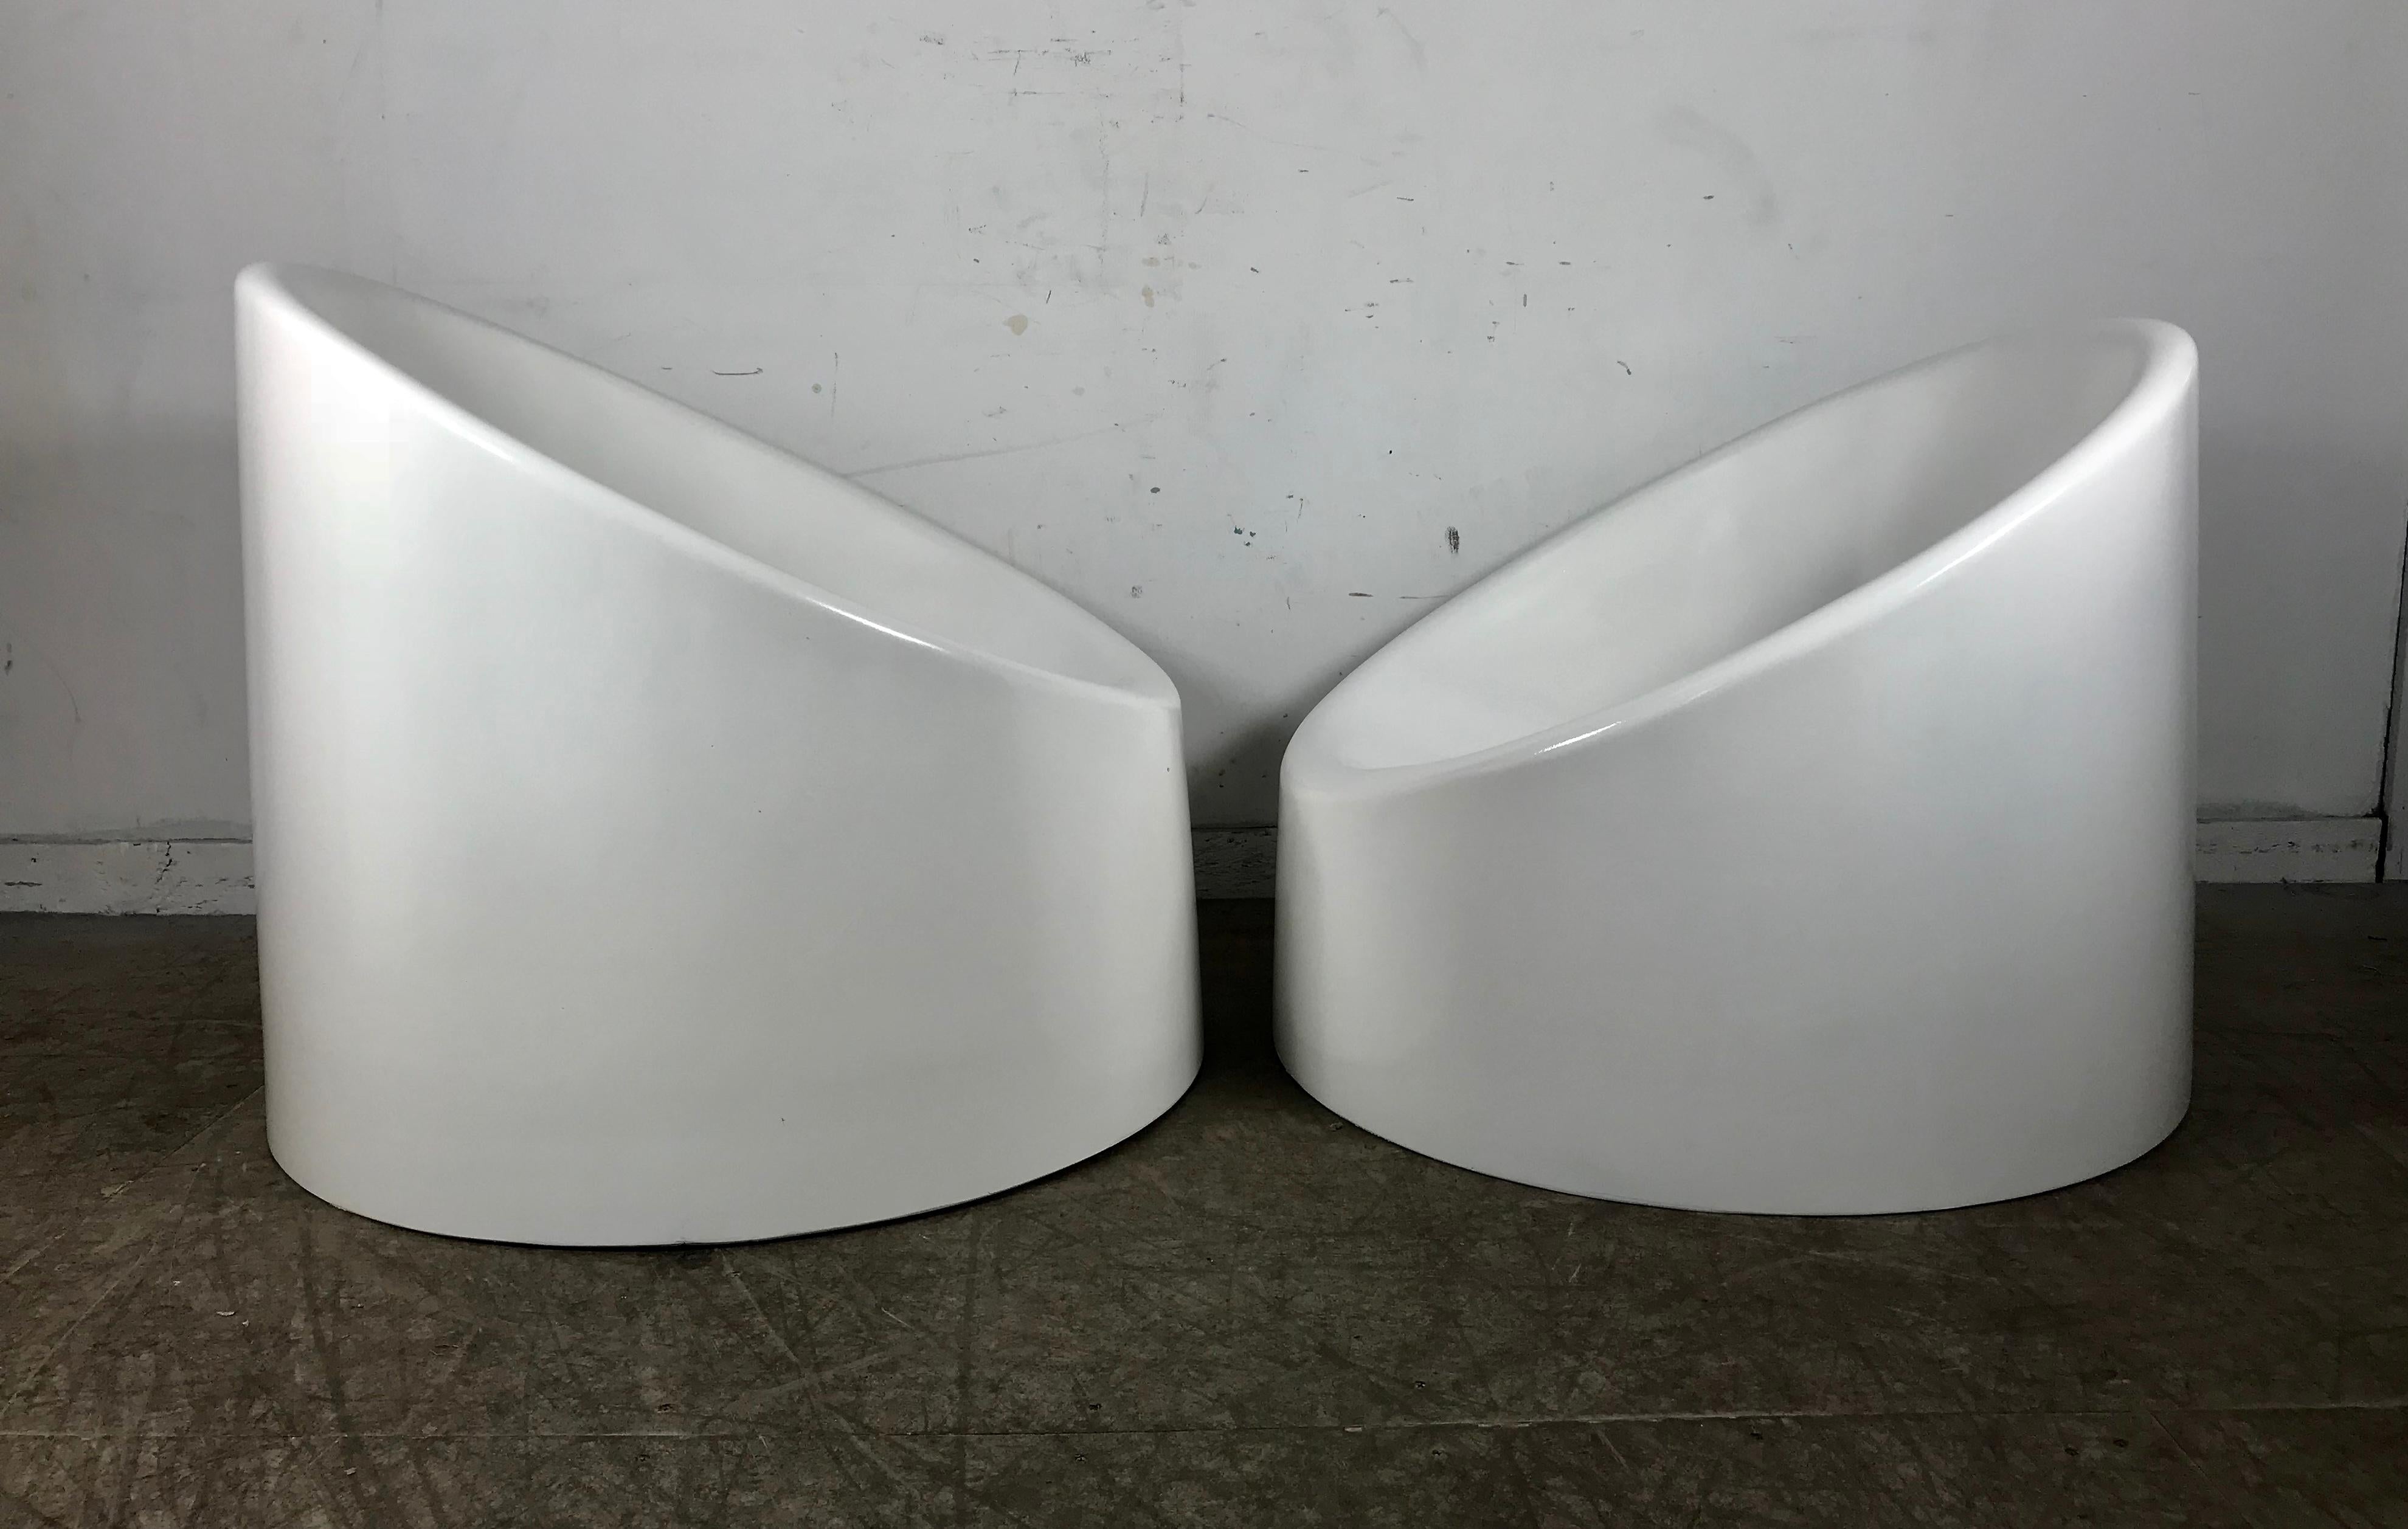 Pop modern Space Age fiberglass pod chairs, professionally restored, perfect for exterior pool side or interior living room, his and hers. Hand delivery avail to New York City or anywhere en route from Buffalo NY.